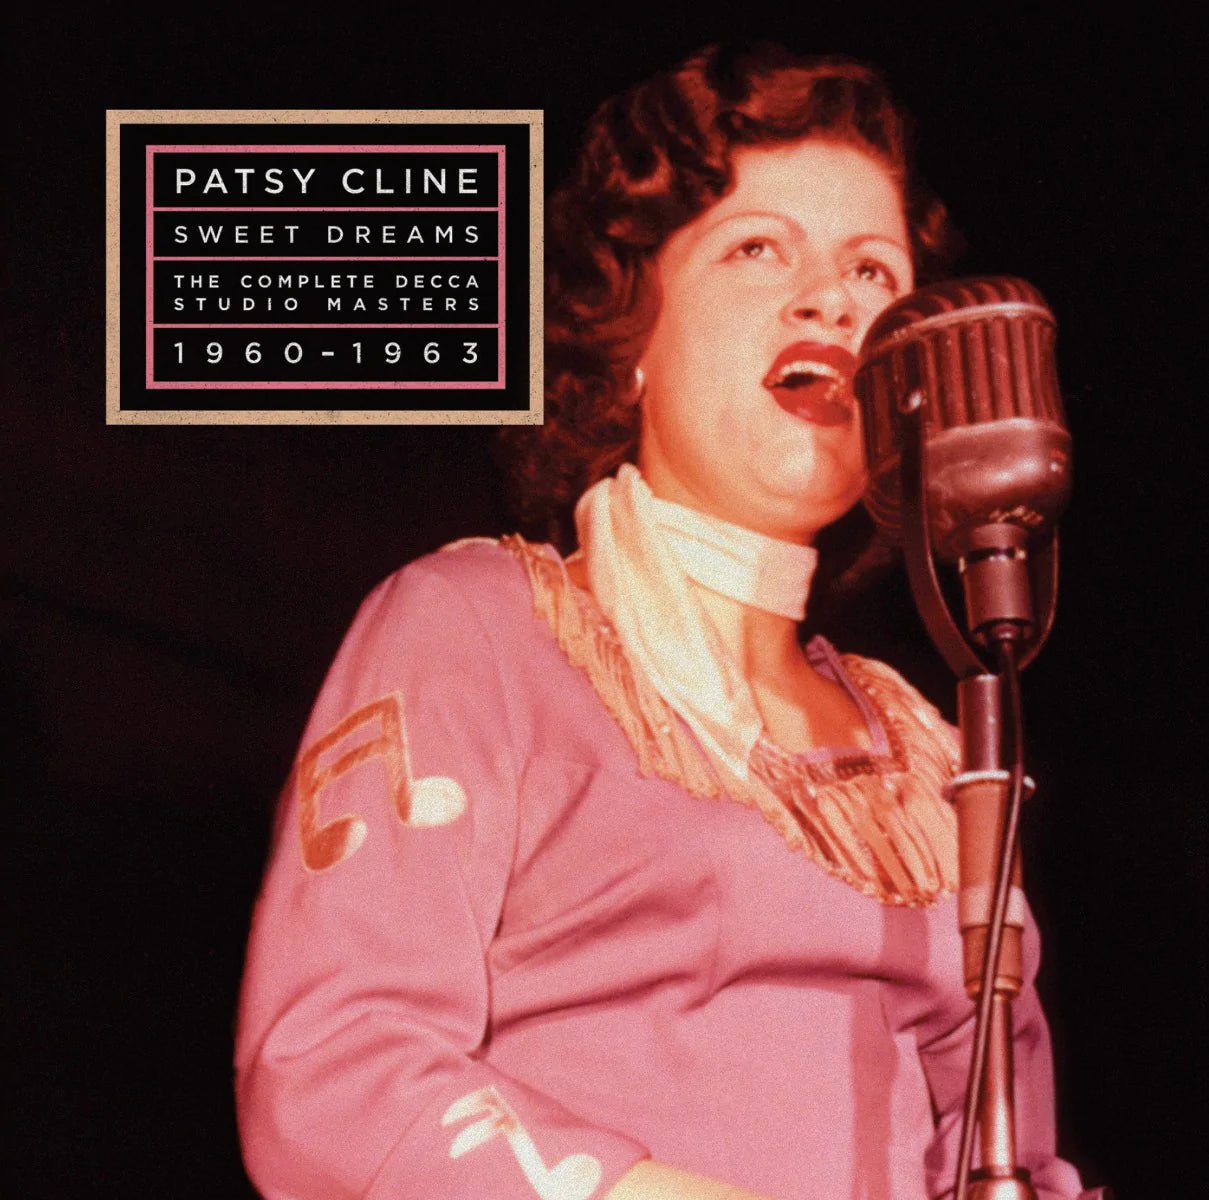 Patsy Cline: Sweet Dreams - The Complete Studio Masters 1960-1963